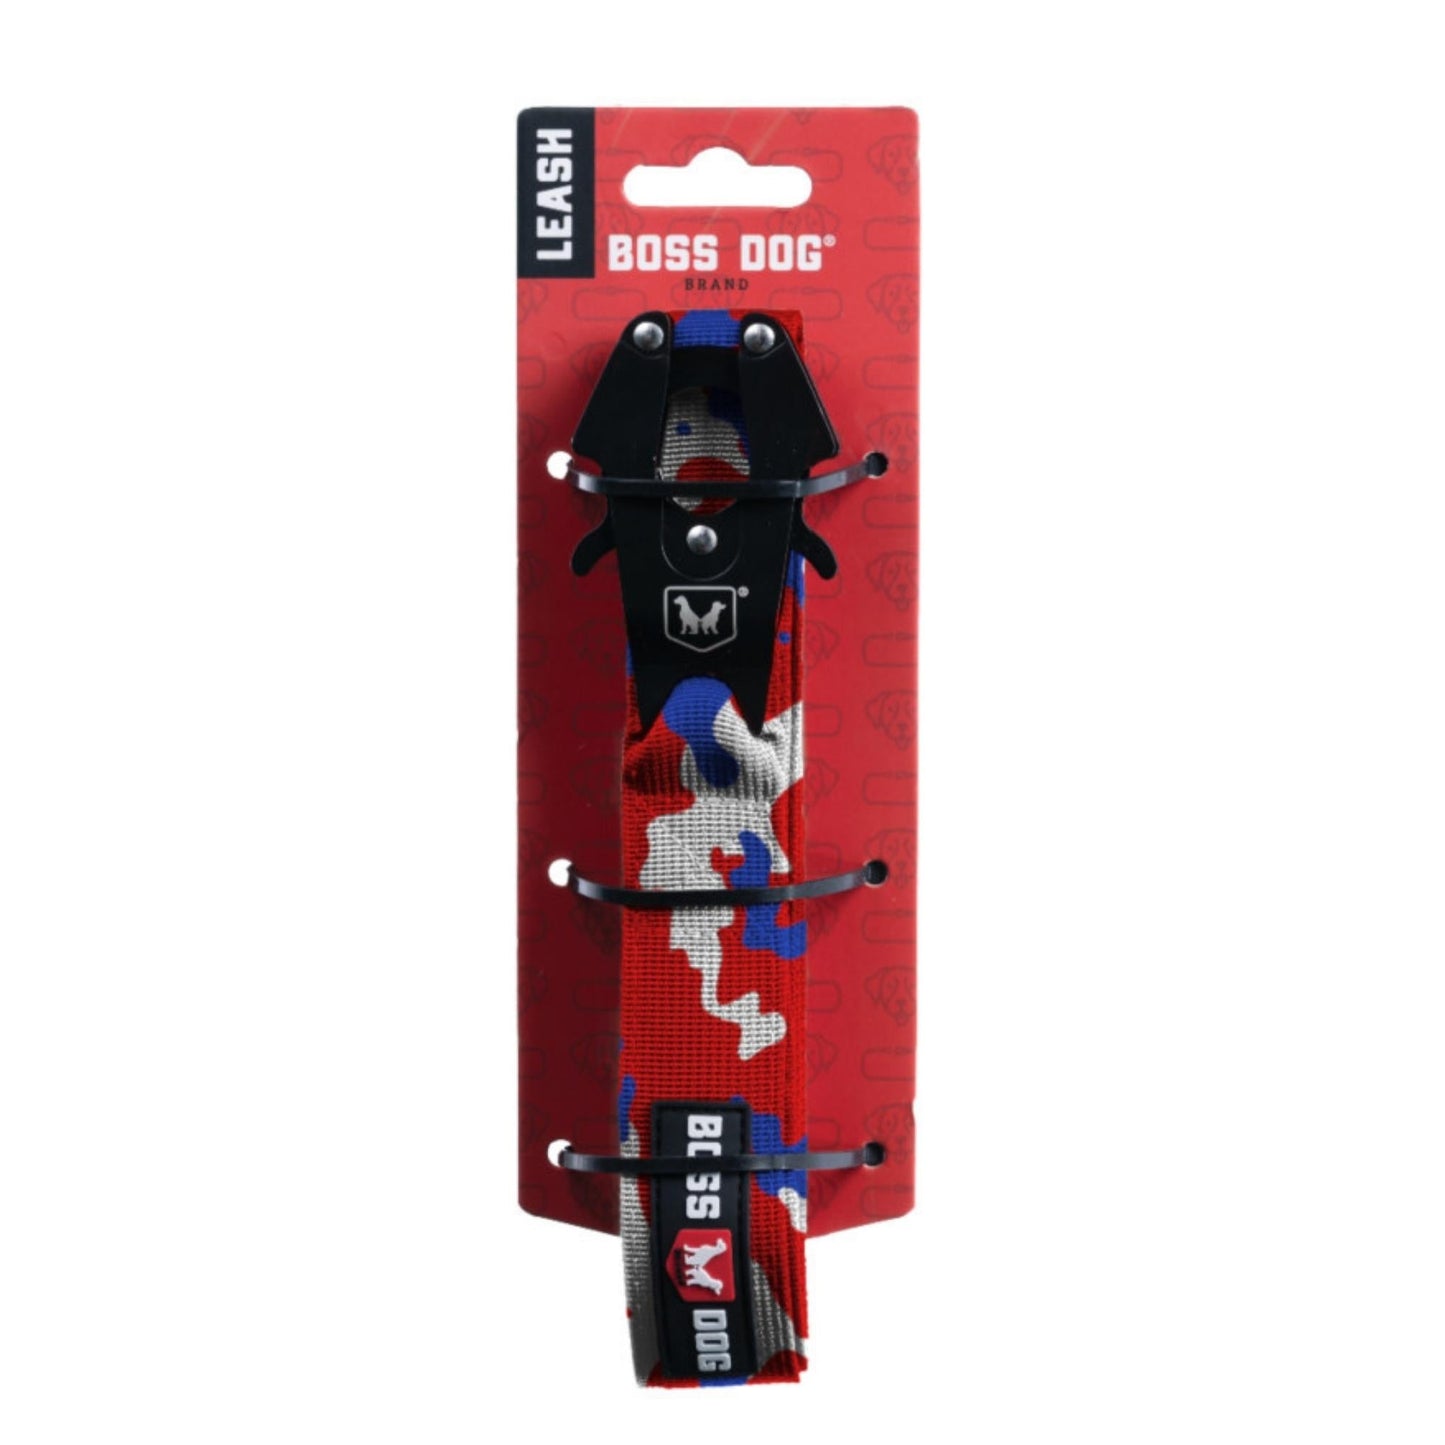 Boss Dog Tactical Dog Leash Red, White, & Blue, 1ea/4 ft